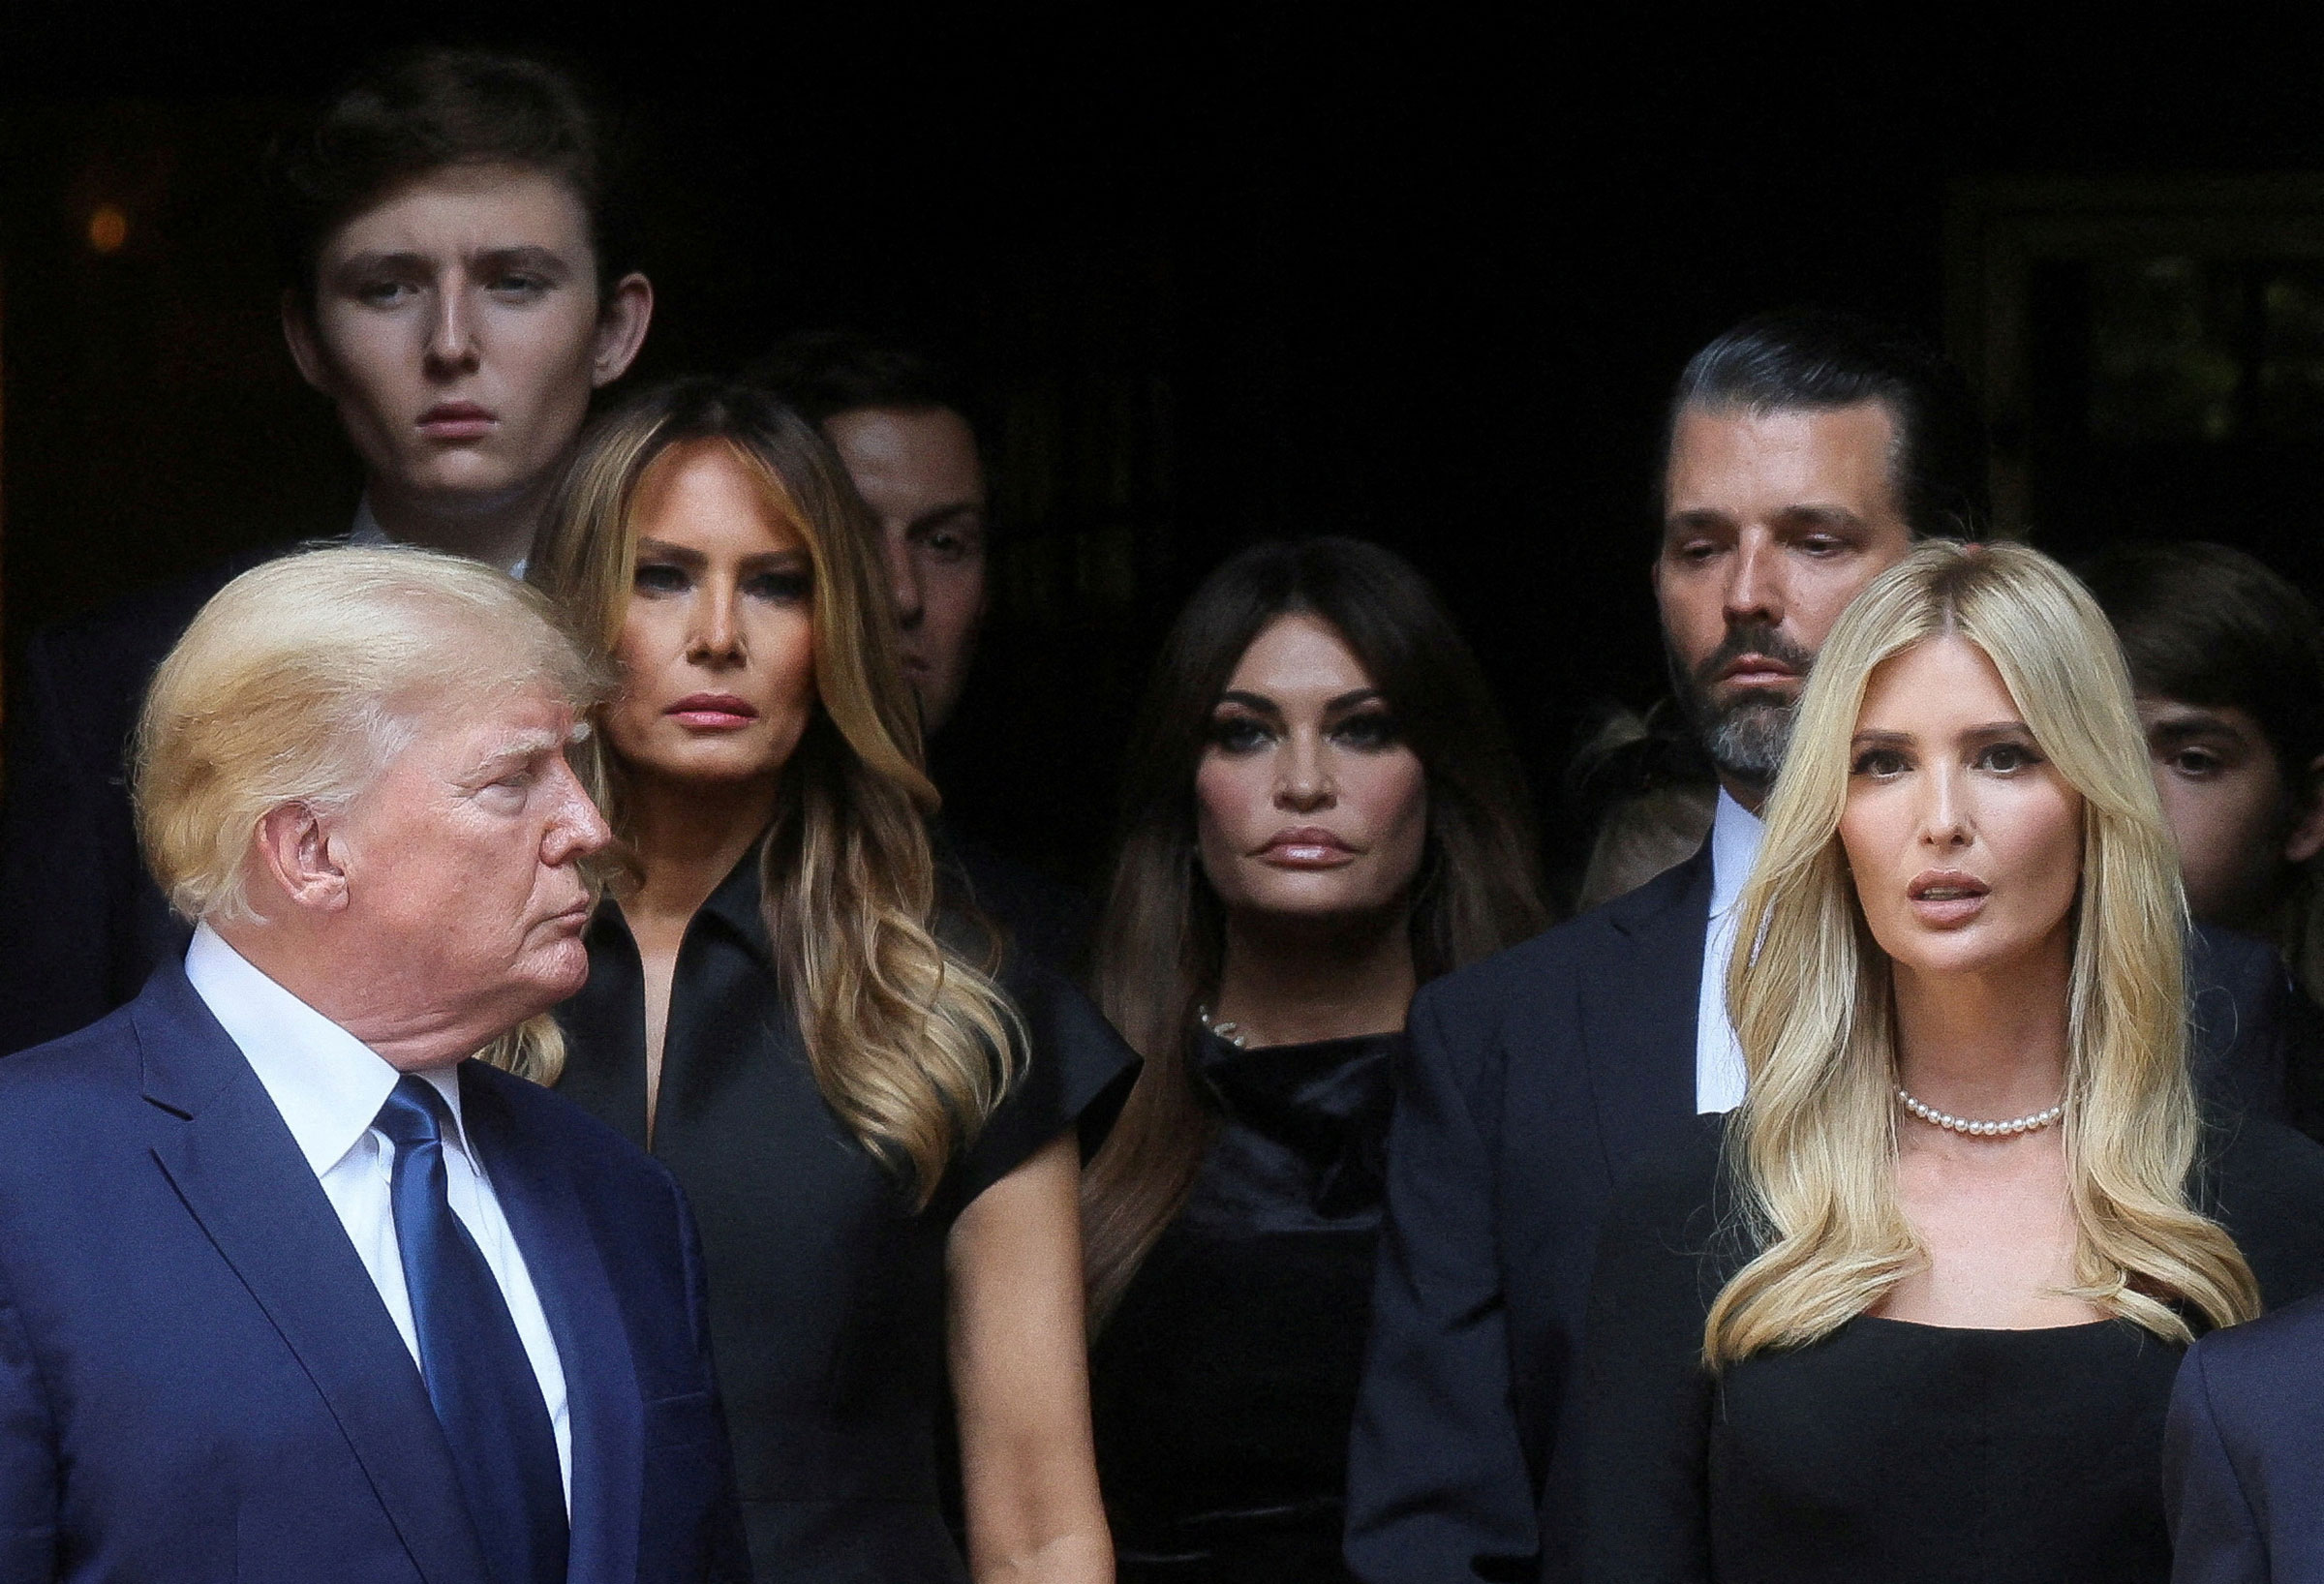 Former U.S. President Donald Trump, his wife Melania, Kimberly Guilfoyle, his sons Barron and Donald Jr. and his daughter Ivanka leave St. Vincent Ferrer Church during the funeral of Ivana Trump, socialite and Trump's first wife, in New York City, on July 20.